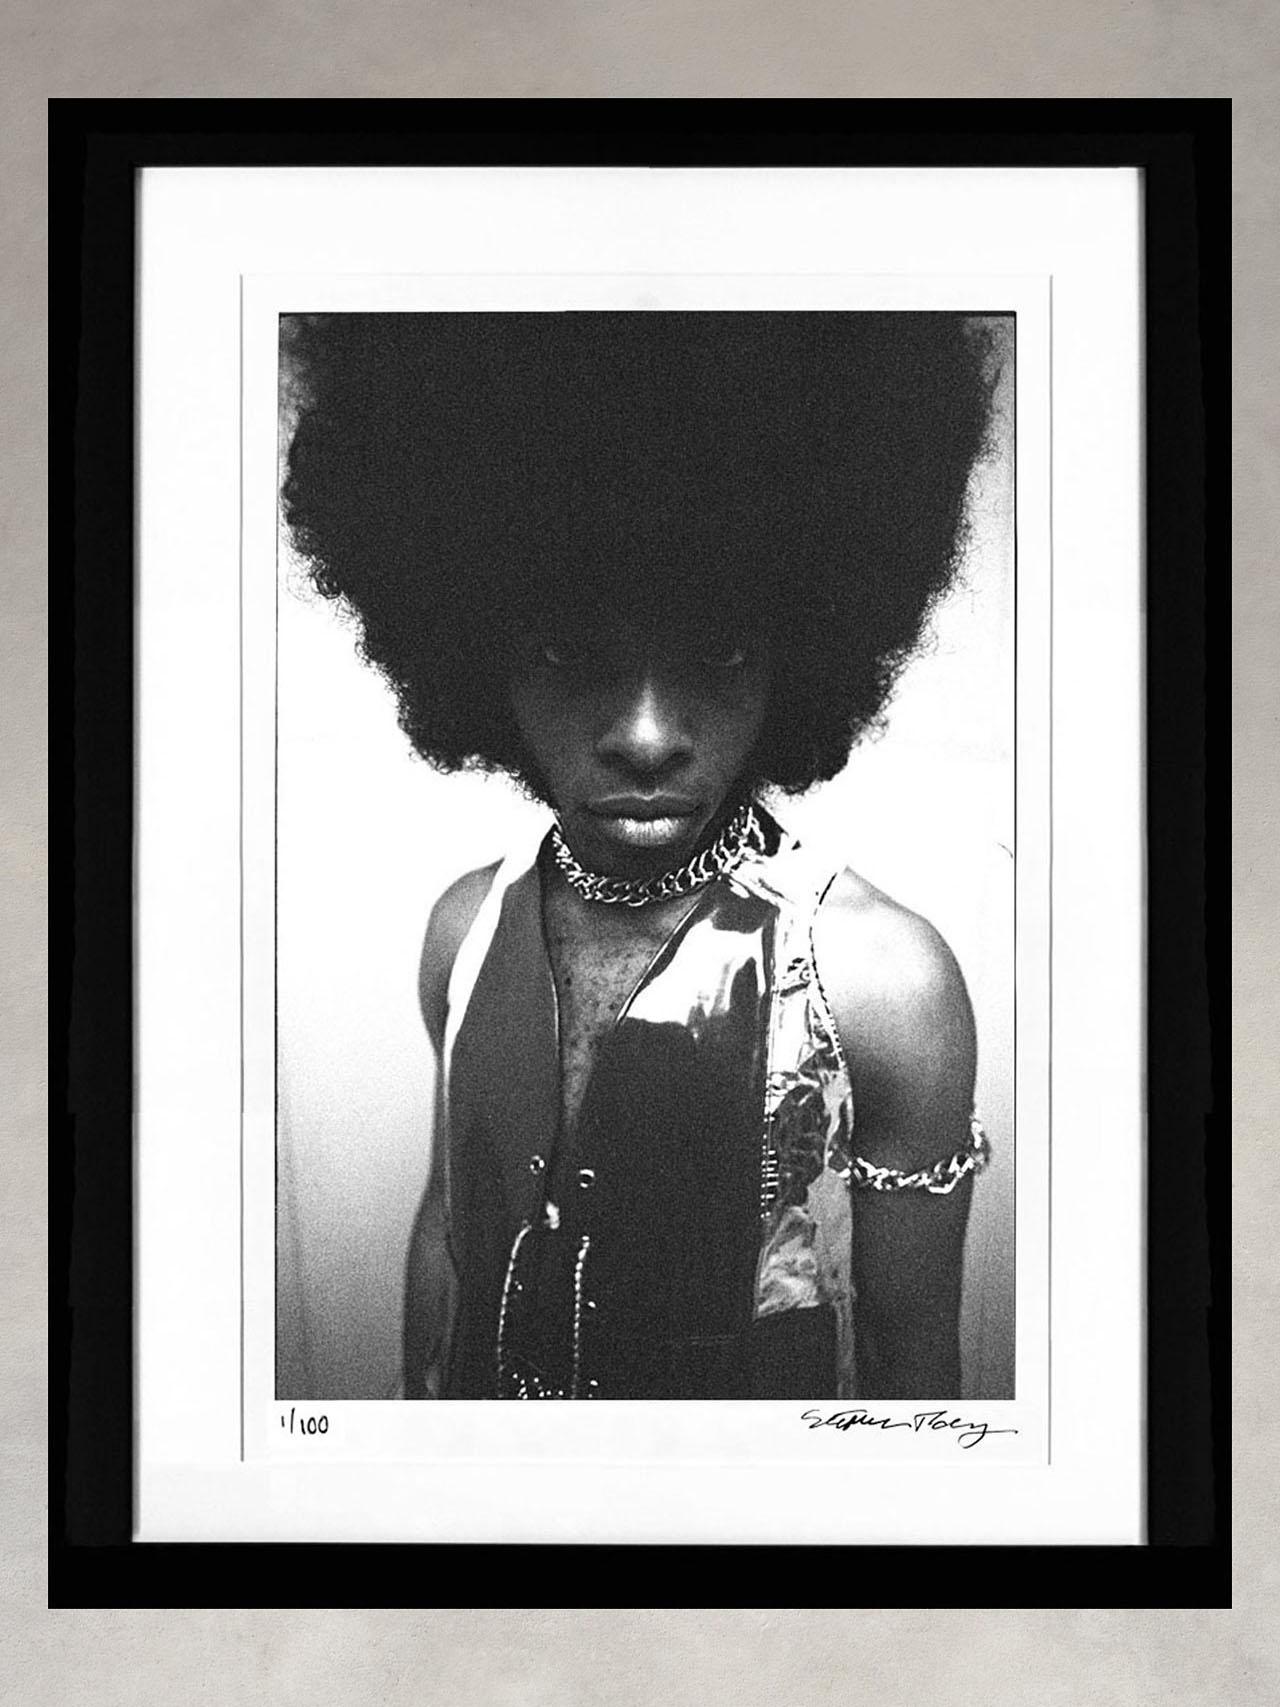 Sly Stone by Stephen Paley image number 1